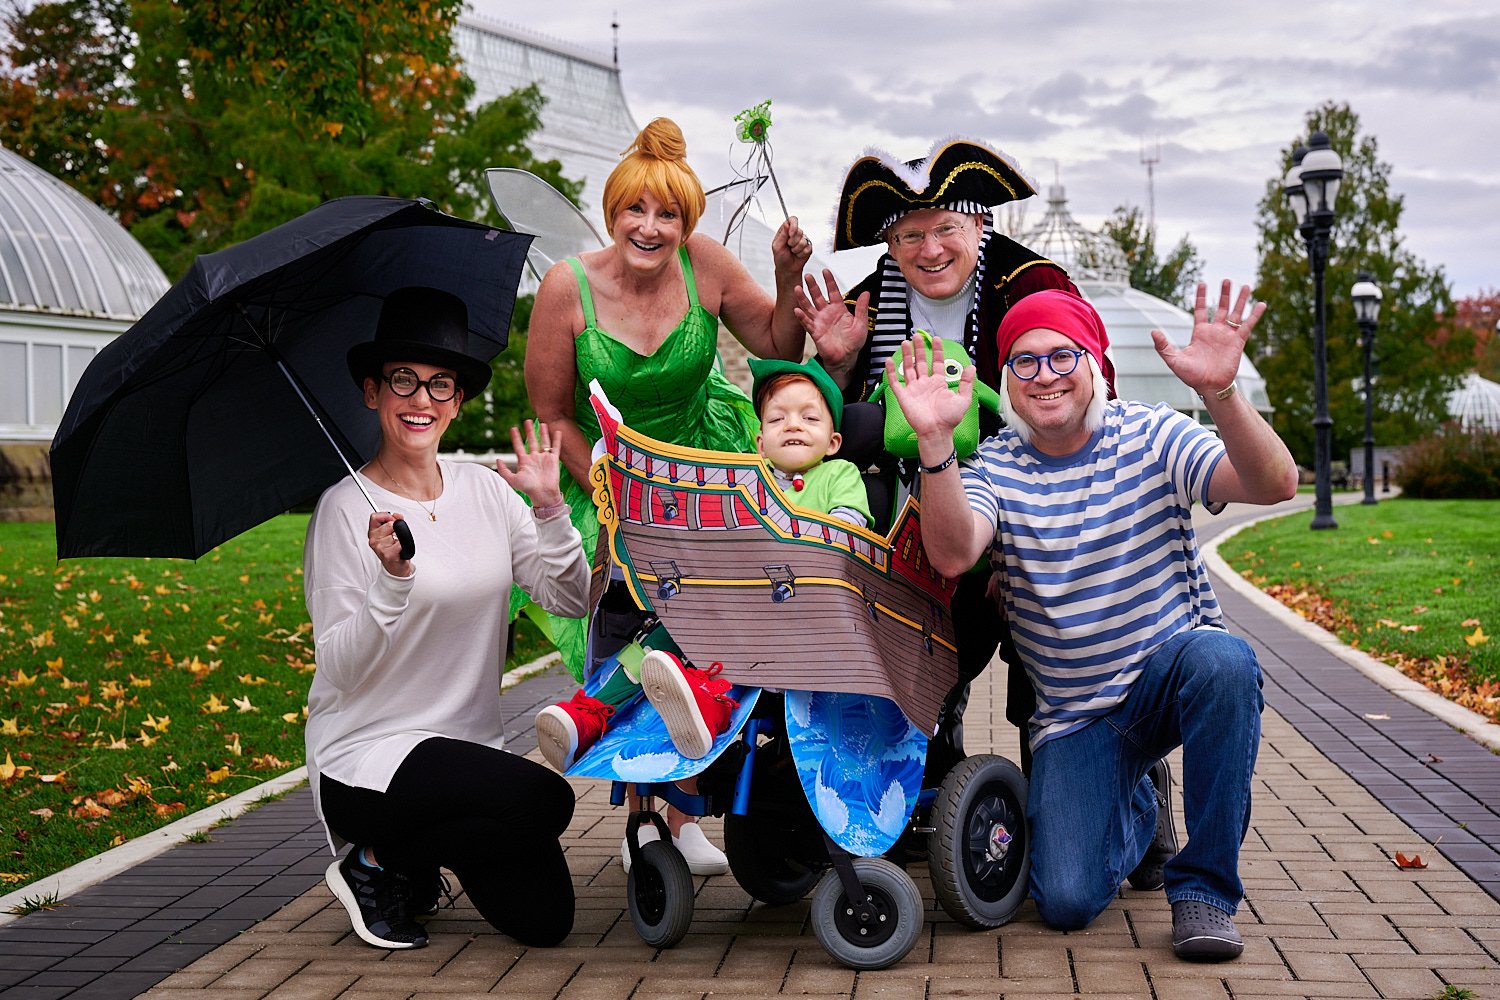  Michaela Robbins is posing with her husband, son and parents in front of Phipps Conservatory and Botanical Gardens of Pittsburgh, PA. The family is dressed in Peter Pan costumes - Tinker Bell, Pirate. 